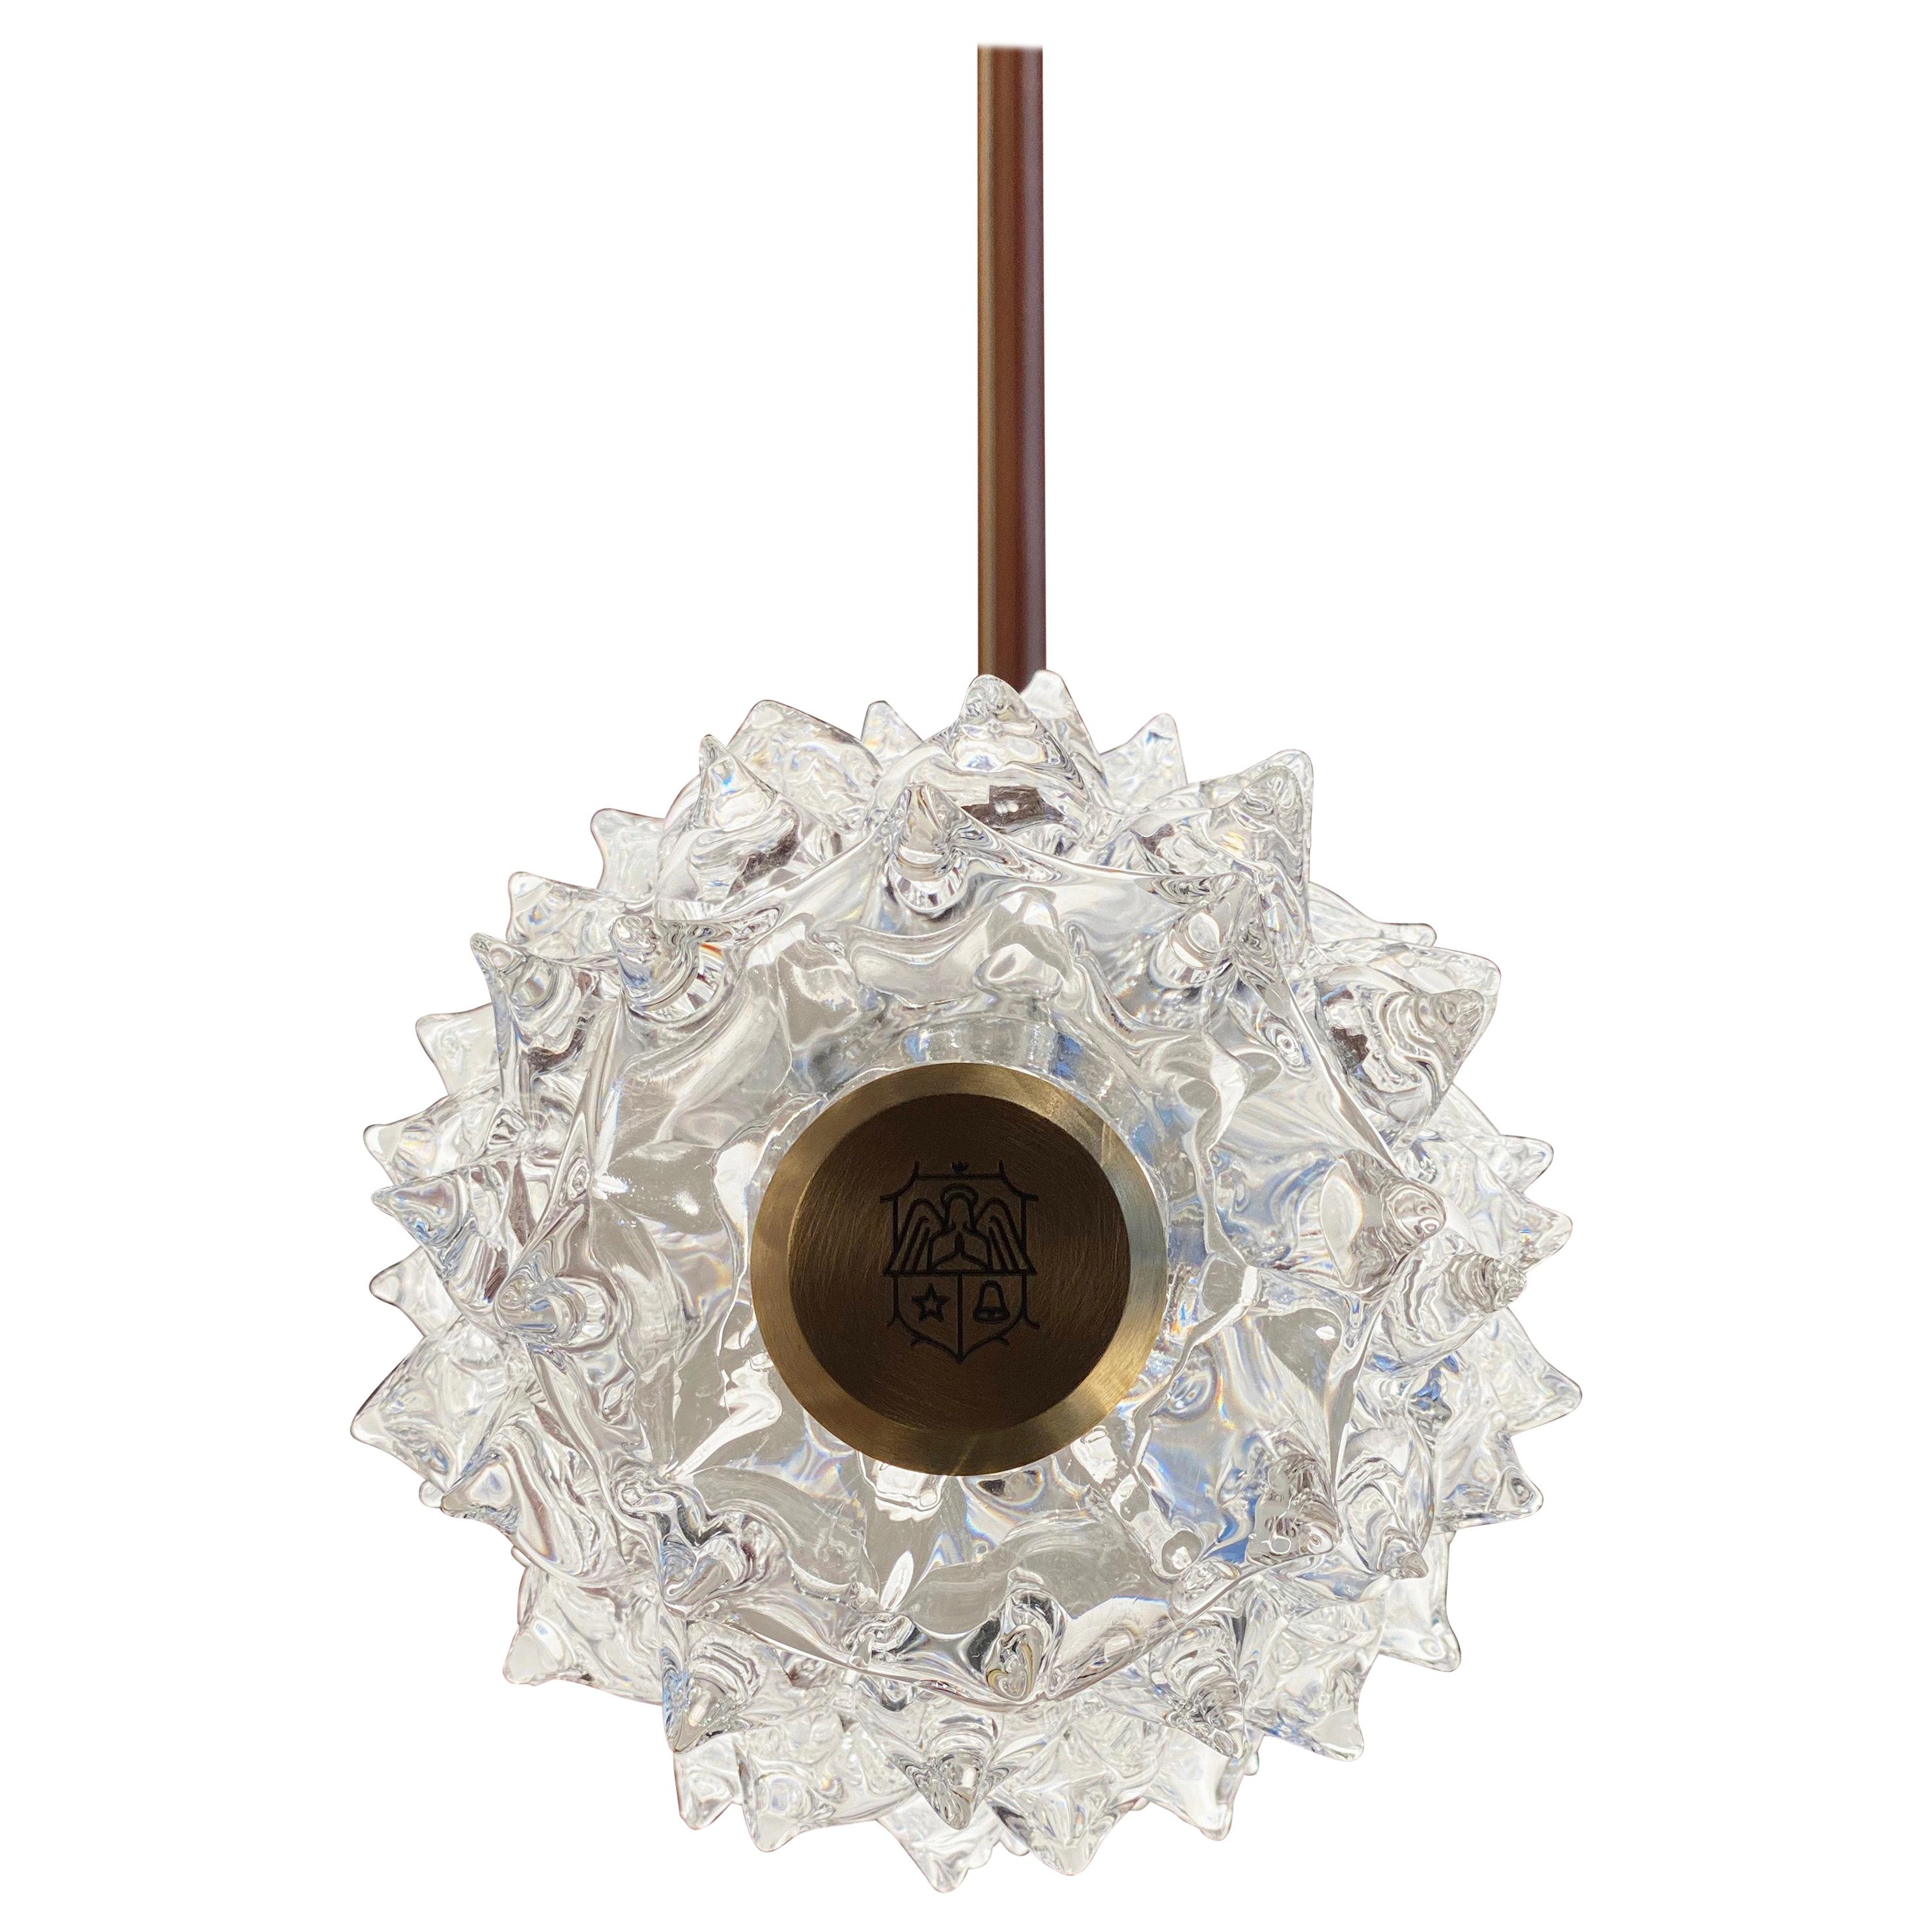 Barovier & Toso Opera 7387 Suspension Light in Crystal with Brushed Gold Finish